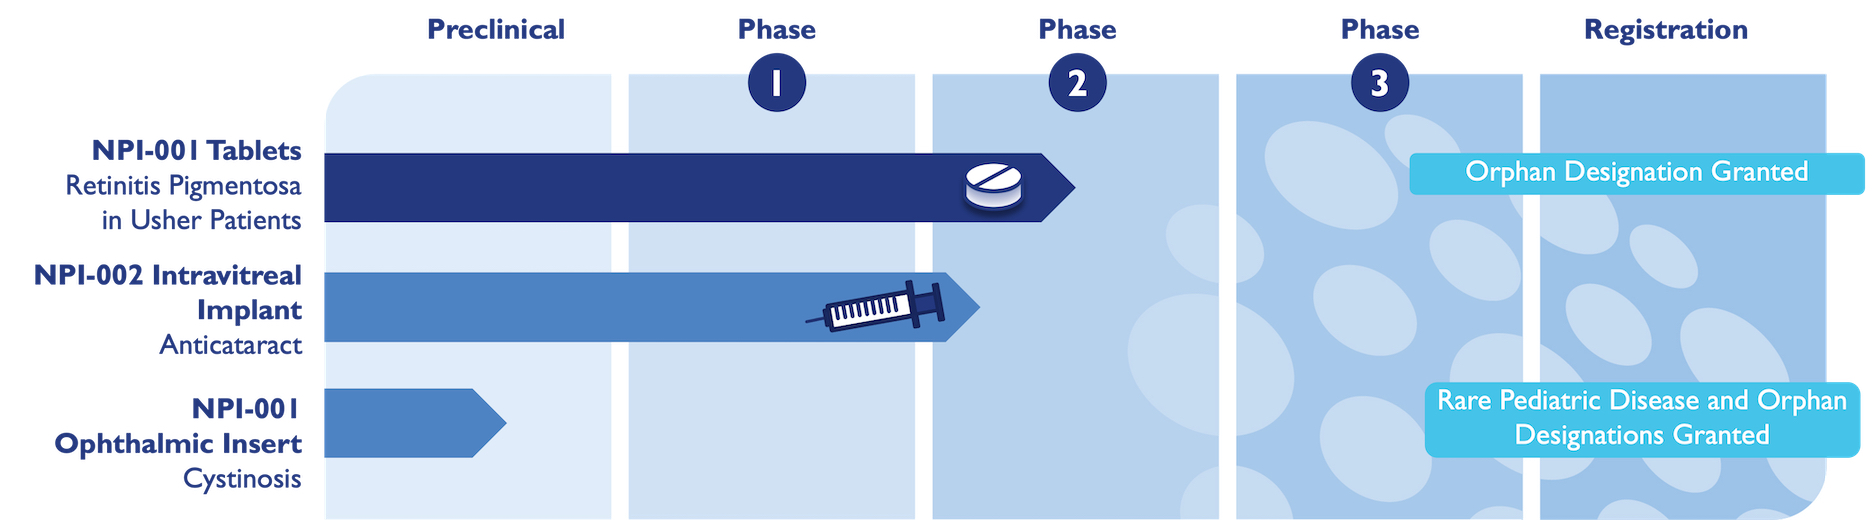 a graphic showing the pipeline stages from Preclinical through Phases 1, 2, 3, and Registration for each project